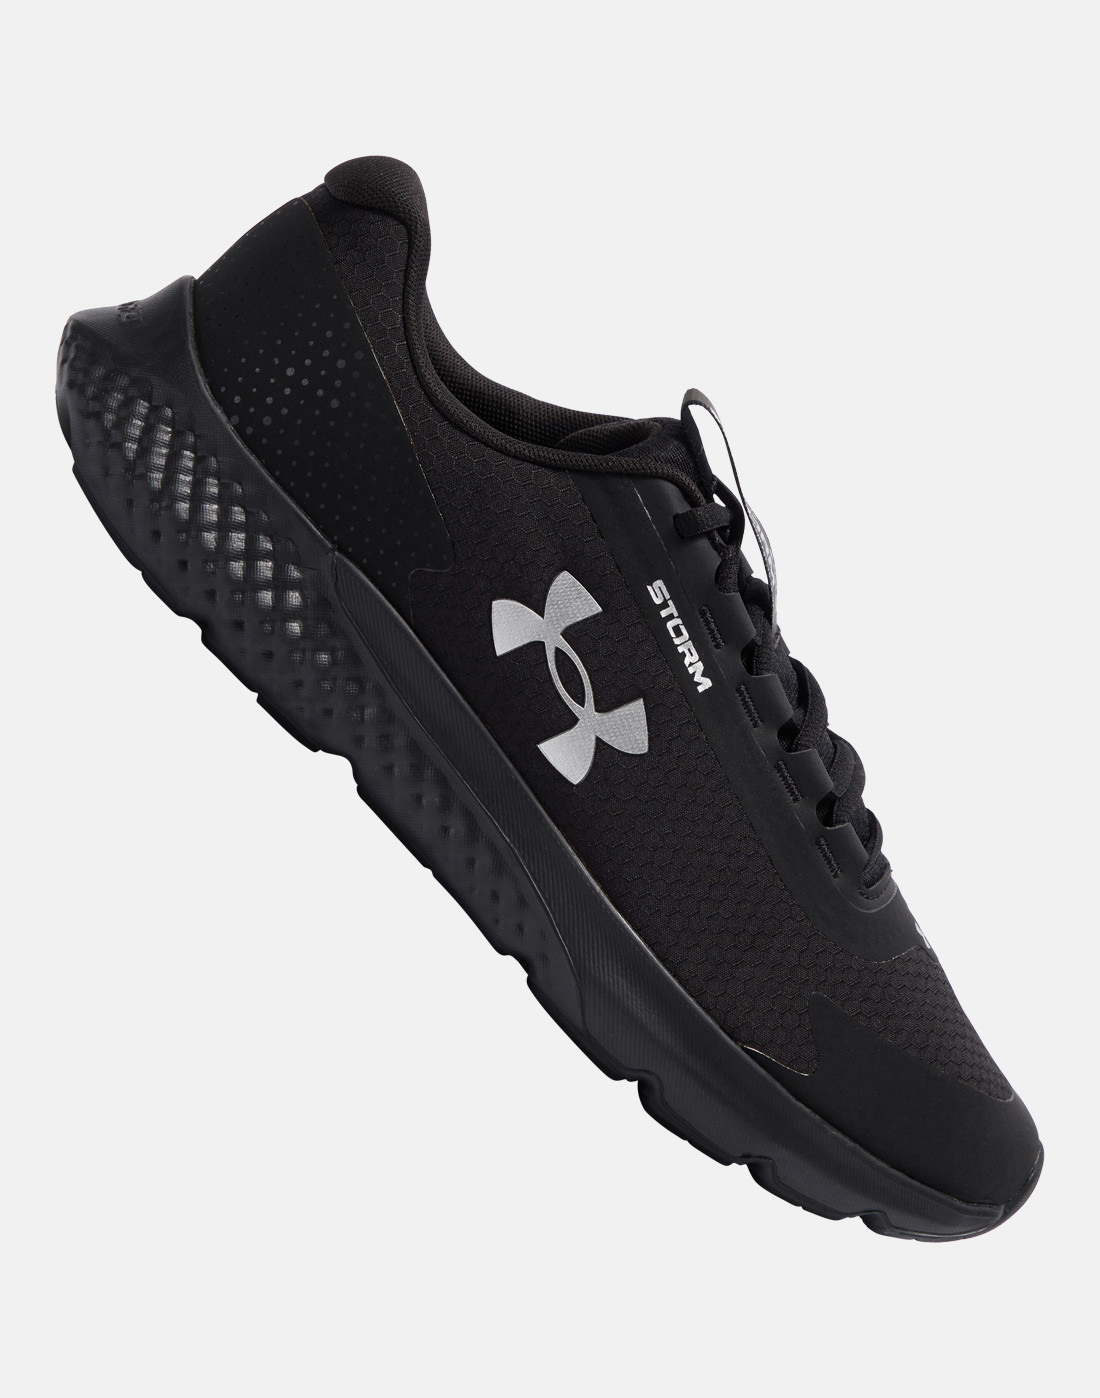 Under Armour Mens Charged Rogue 3 Storm - Black